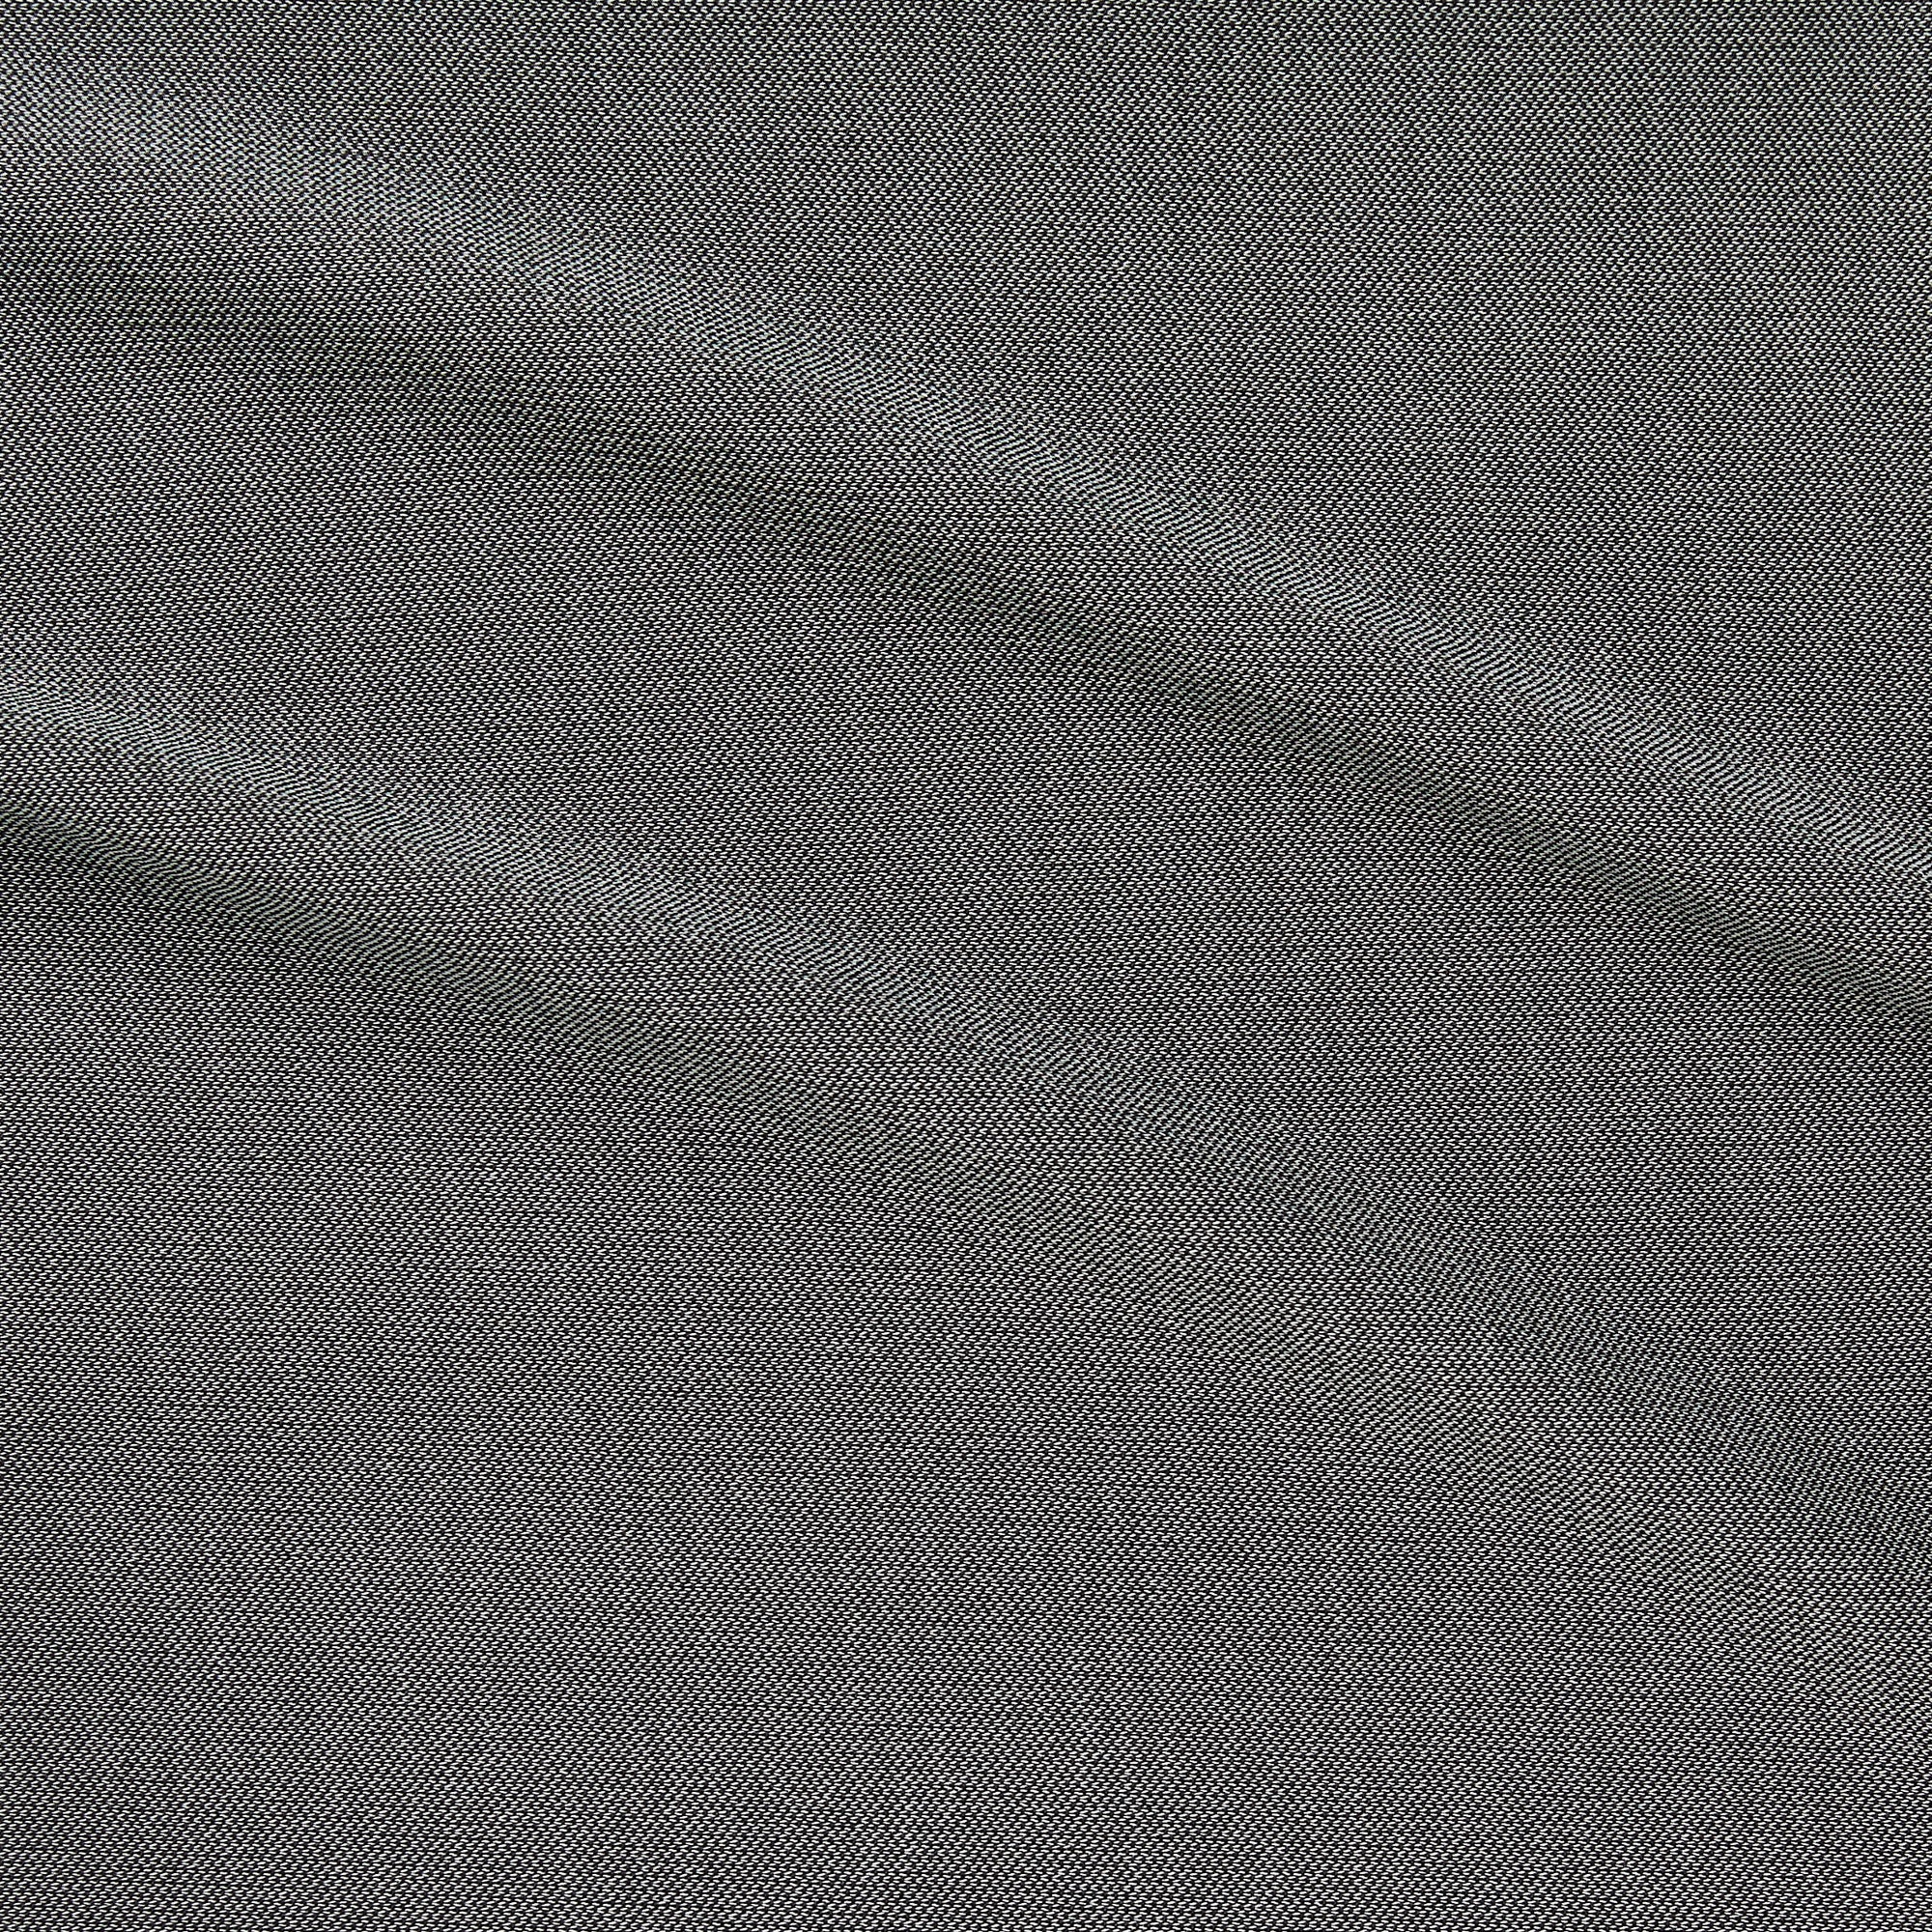 Displaying illusion knit a grey color version of a stretch polyester and nylon blend with good drape